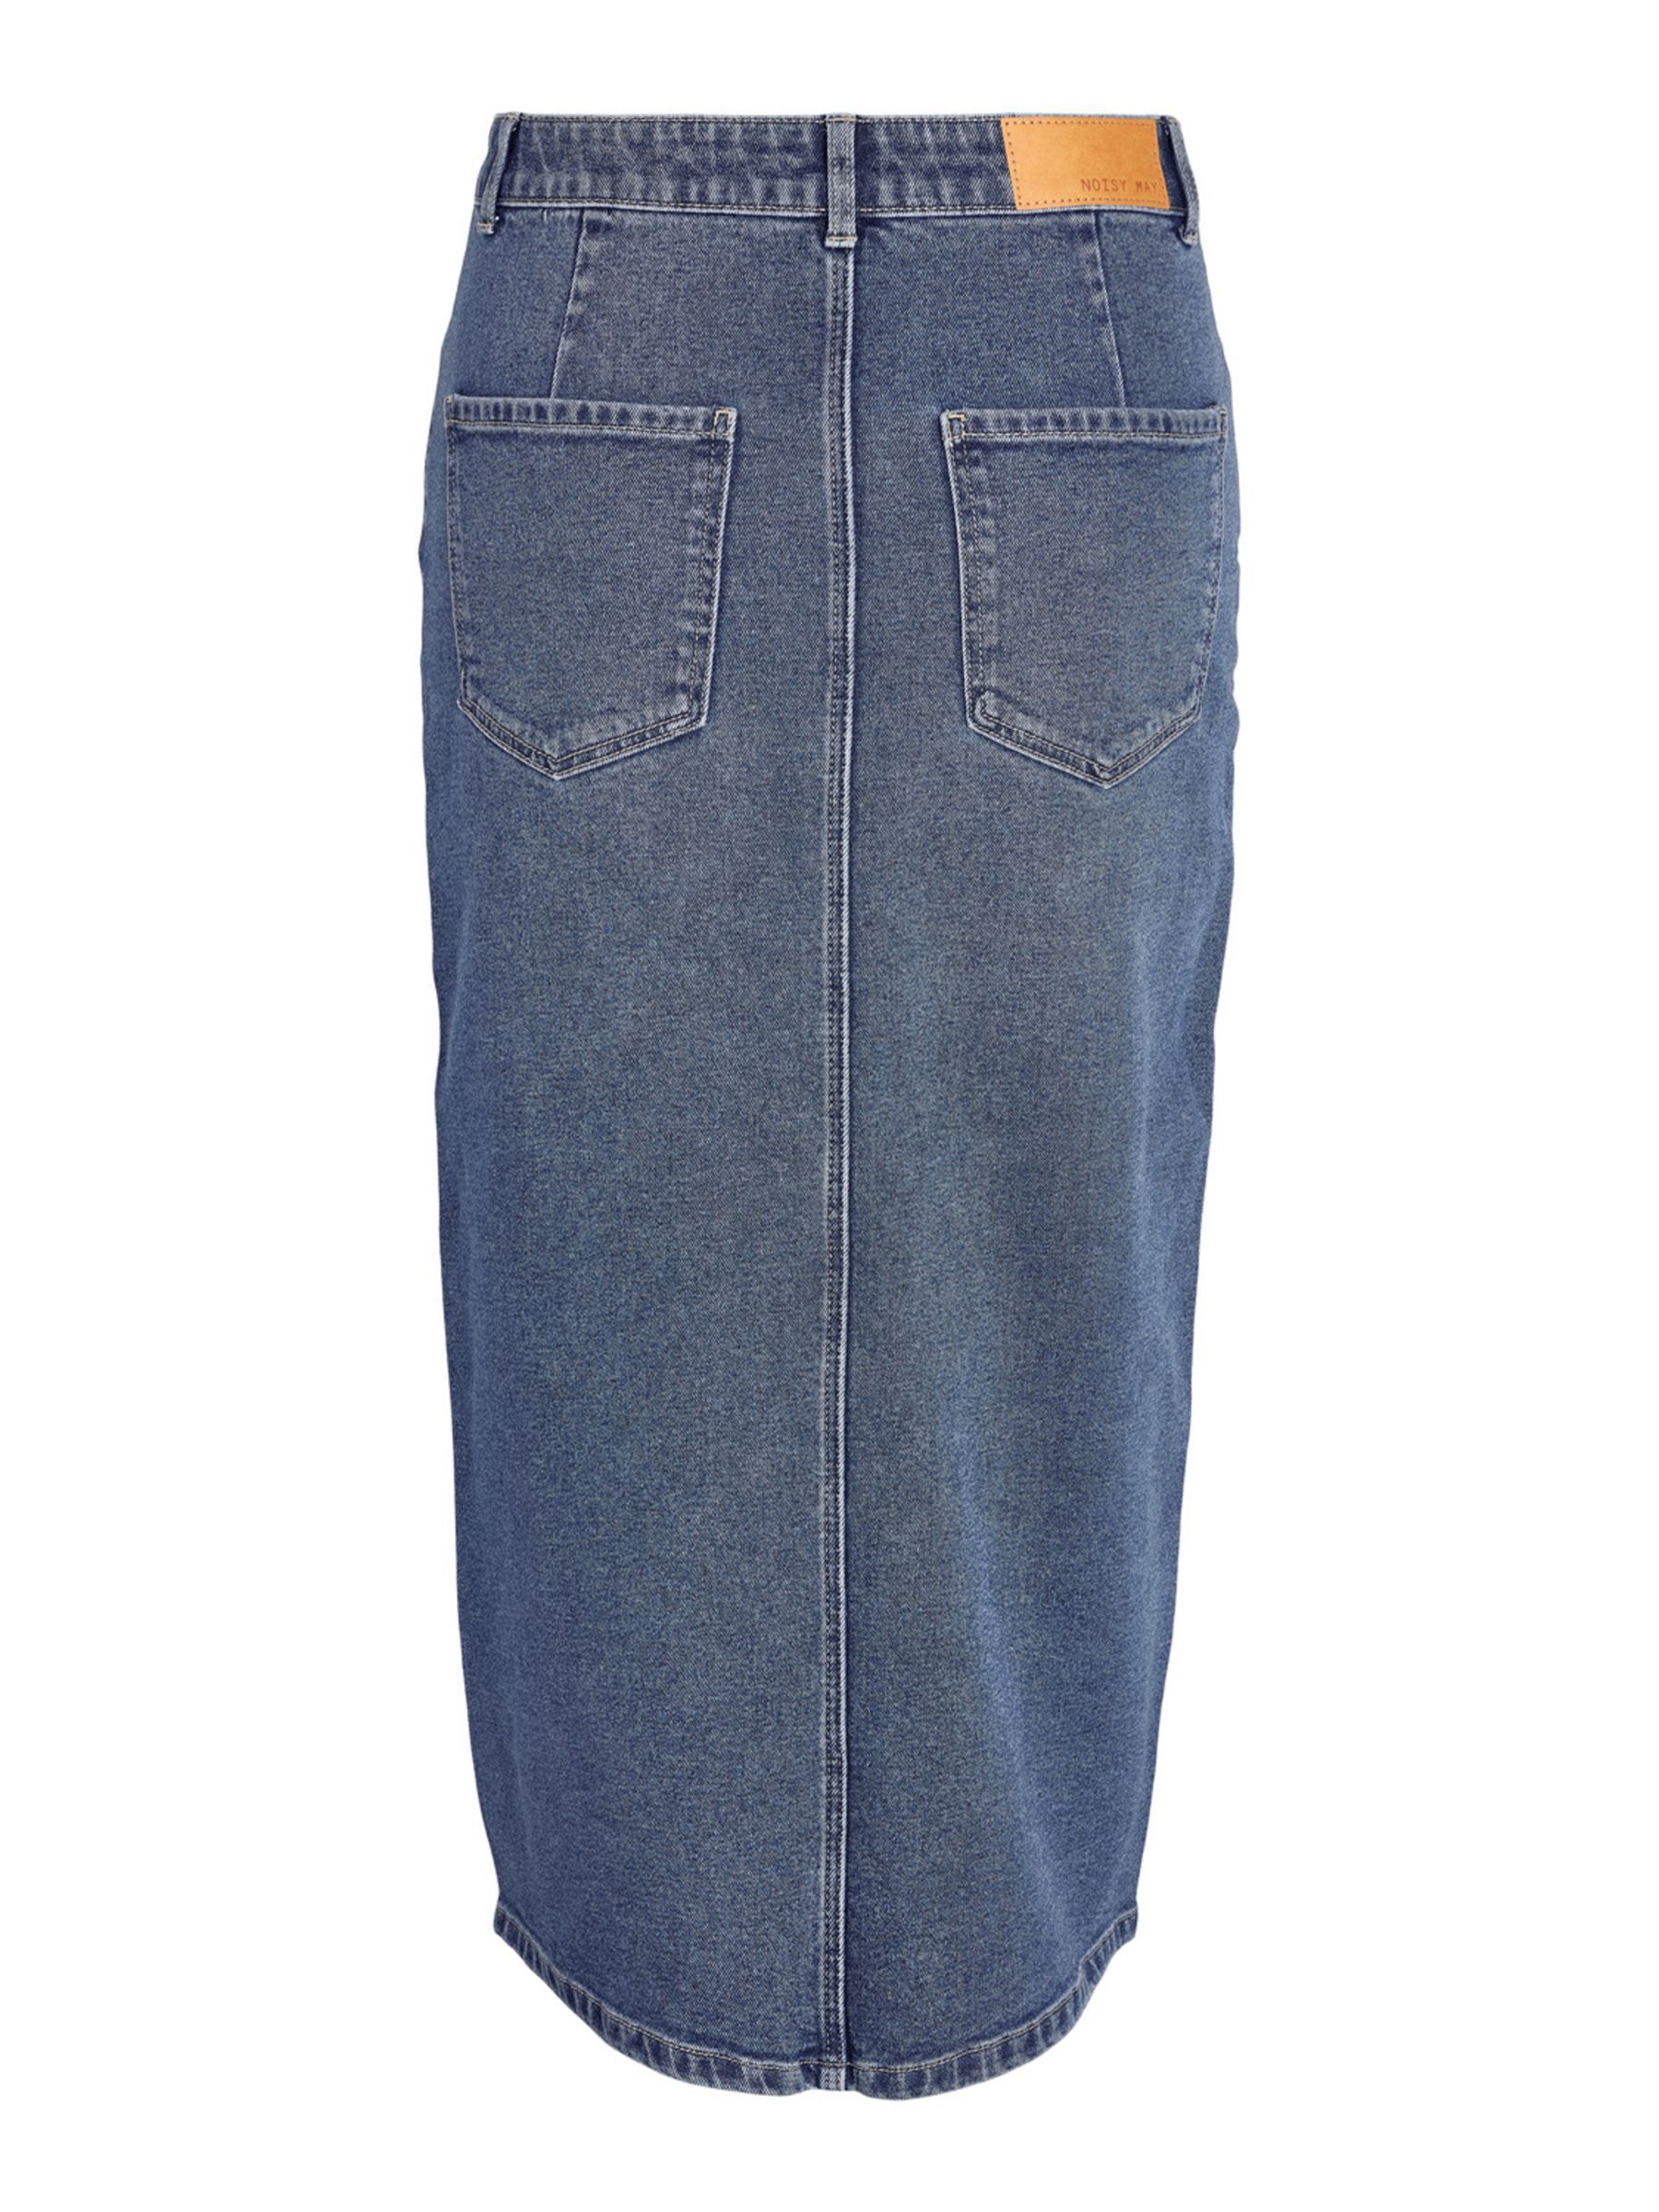 Amazon.com: Denim Cargo Mini Skirts for Women High Waisted Pencil Bodycon  Y2K Short Fall Jean Skirt,Blue,S : Clothing, Shoes & Jewelry